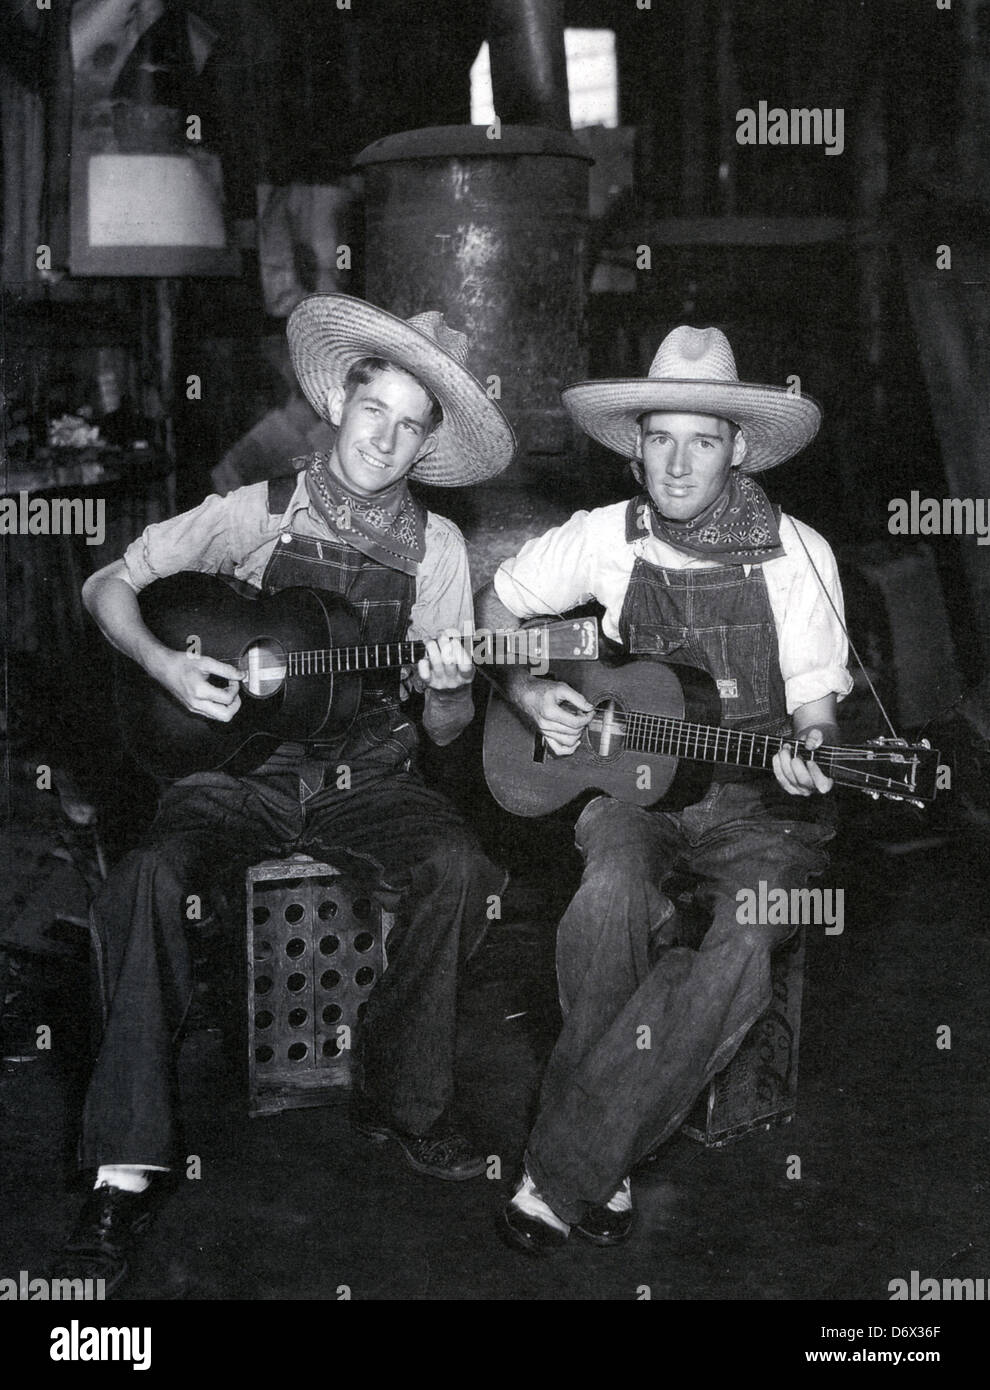 THE DELMORE BROTHERS (Alton and Rabon) US Country musicians about 1935 Stock Photo